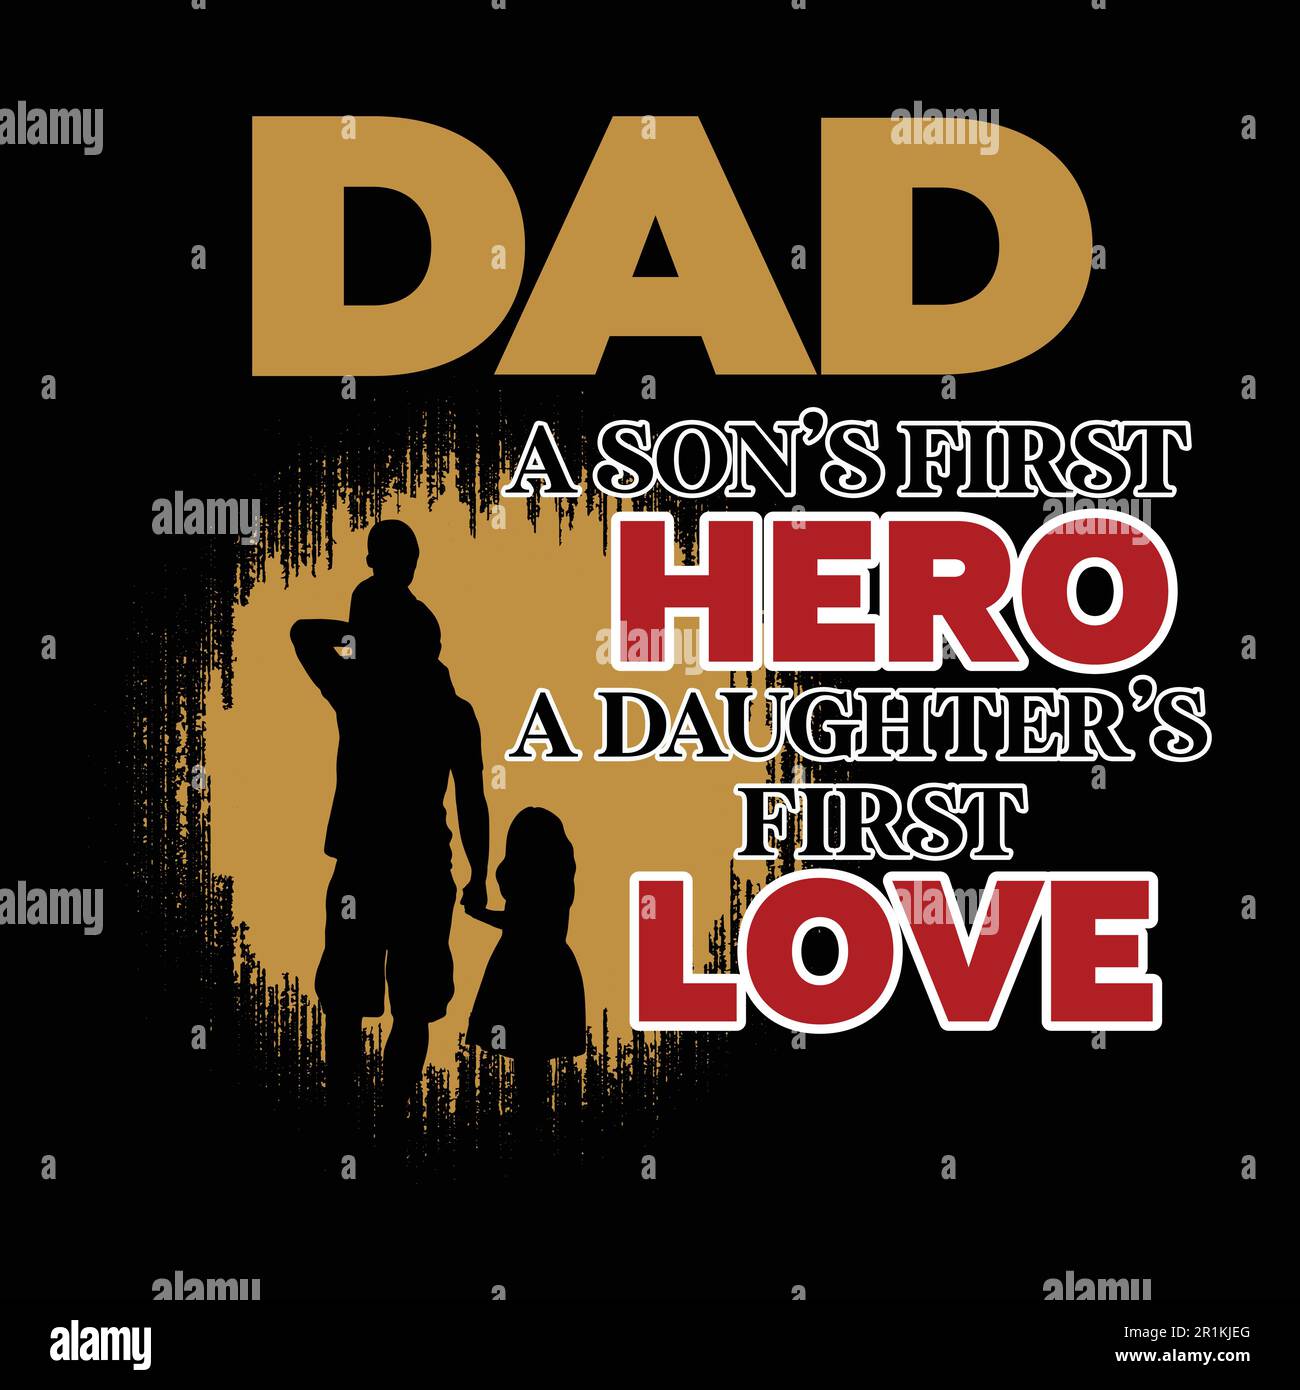 Dad A son's first hero a daughter's first love- father's day t shirt design Stock Vector